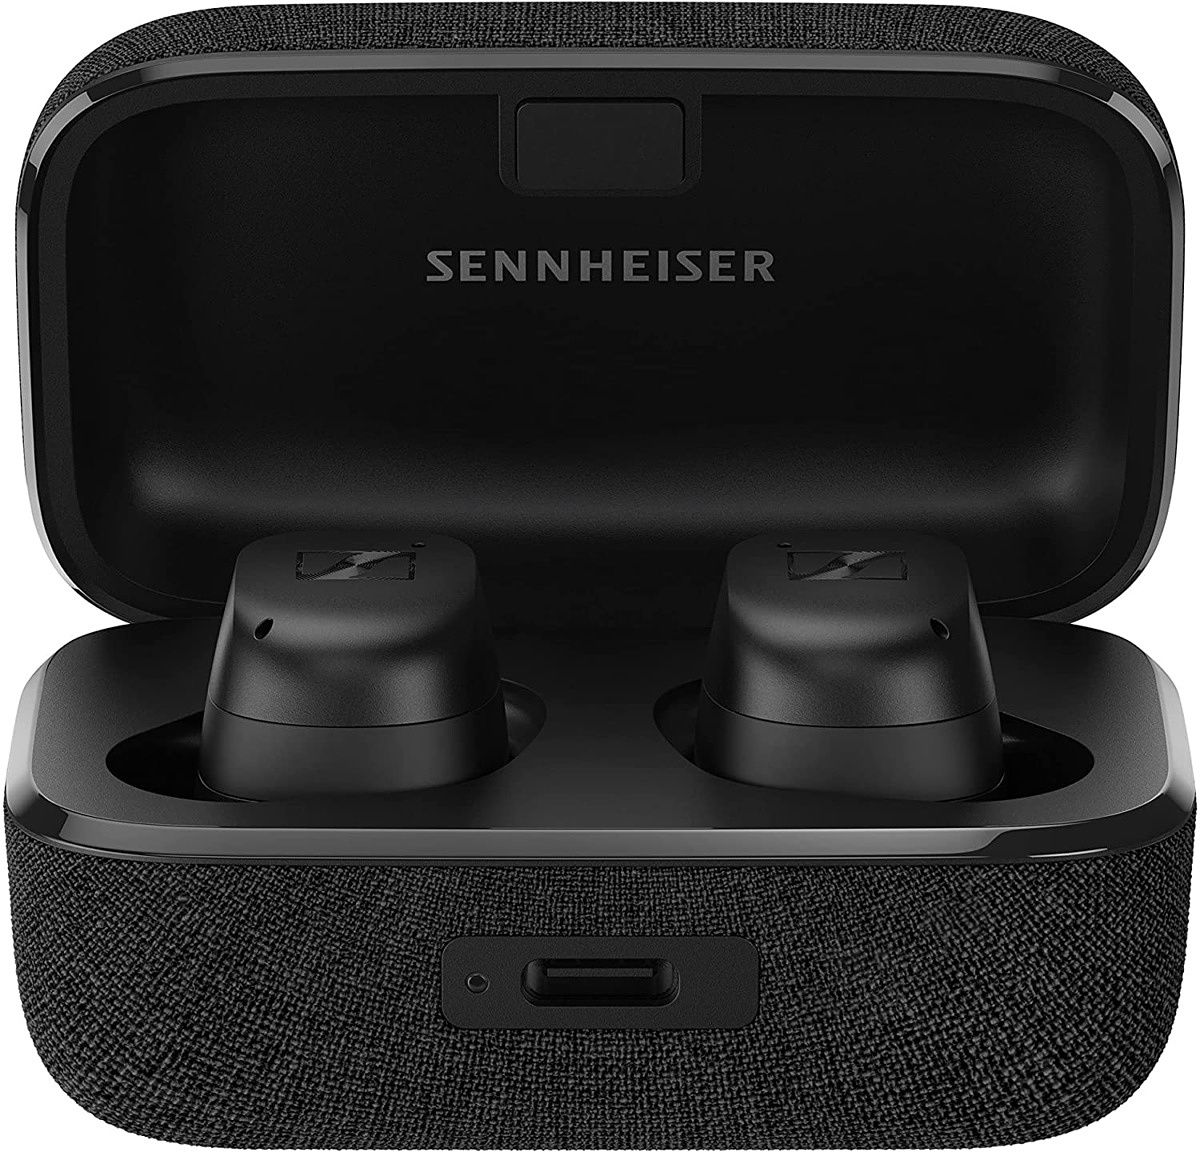 If you prioritize audio quality over everything else and don't mind spending $250 on a pair of earbuds then we recommend checking out the Sennheiser Momentum True Wireless 3. This new pair of earbuds represents a modest upgrade over their predecessors but you can still expect high-fidelity audio from these buds regardless of the audio source. The Sennheiser Momentum True Wireless 3 earbuds have better ANC and they also support more codecs including AAC, SBC, aptX, and aptX Adaptive.